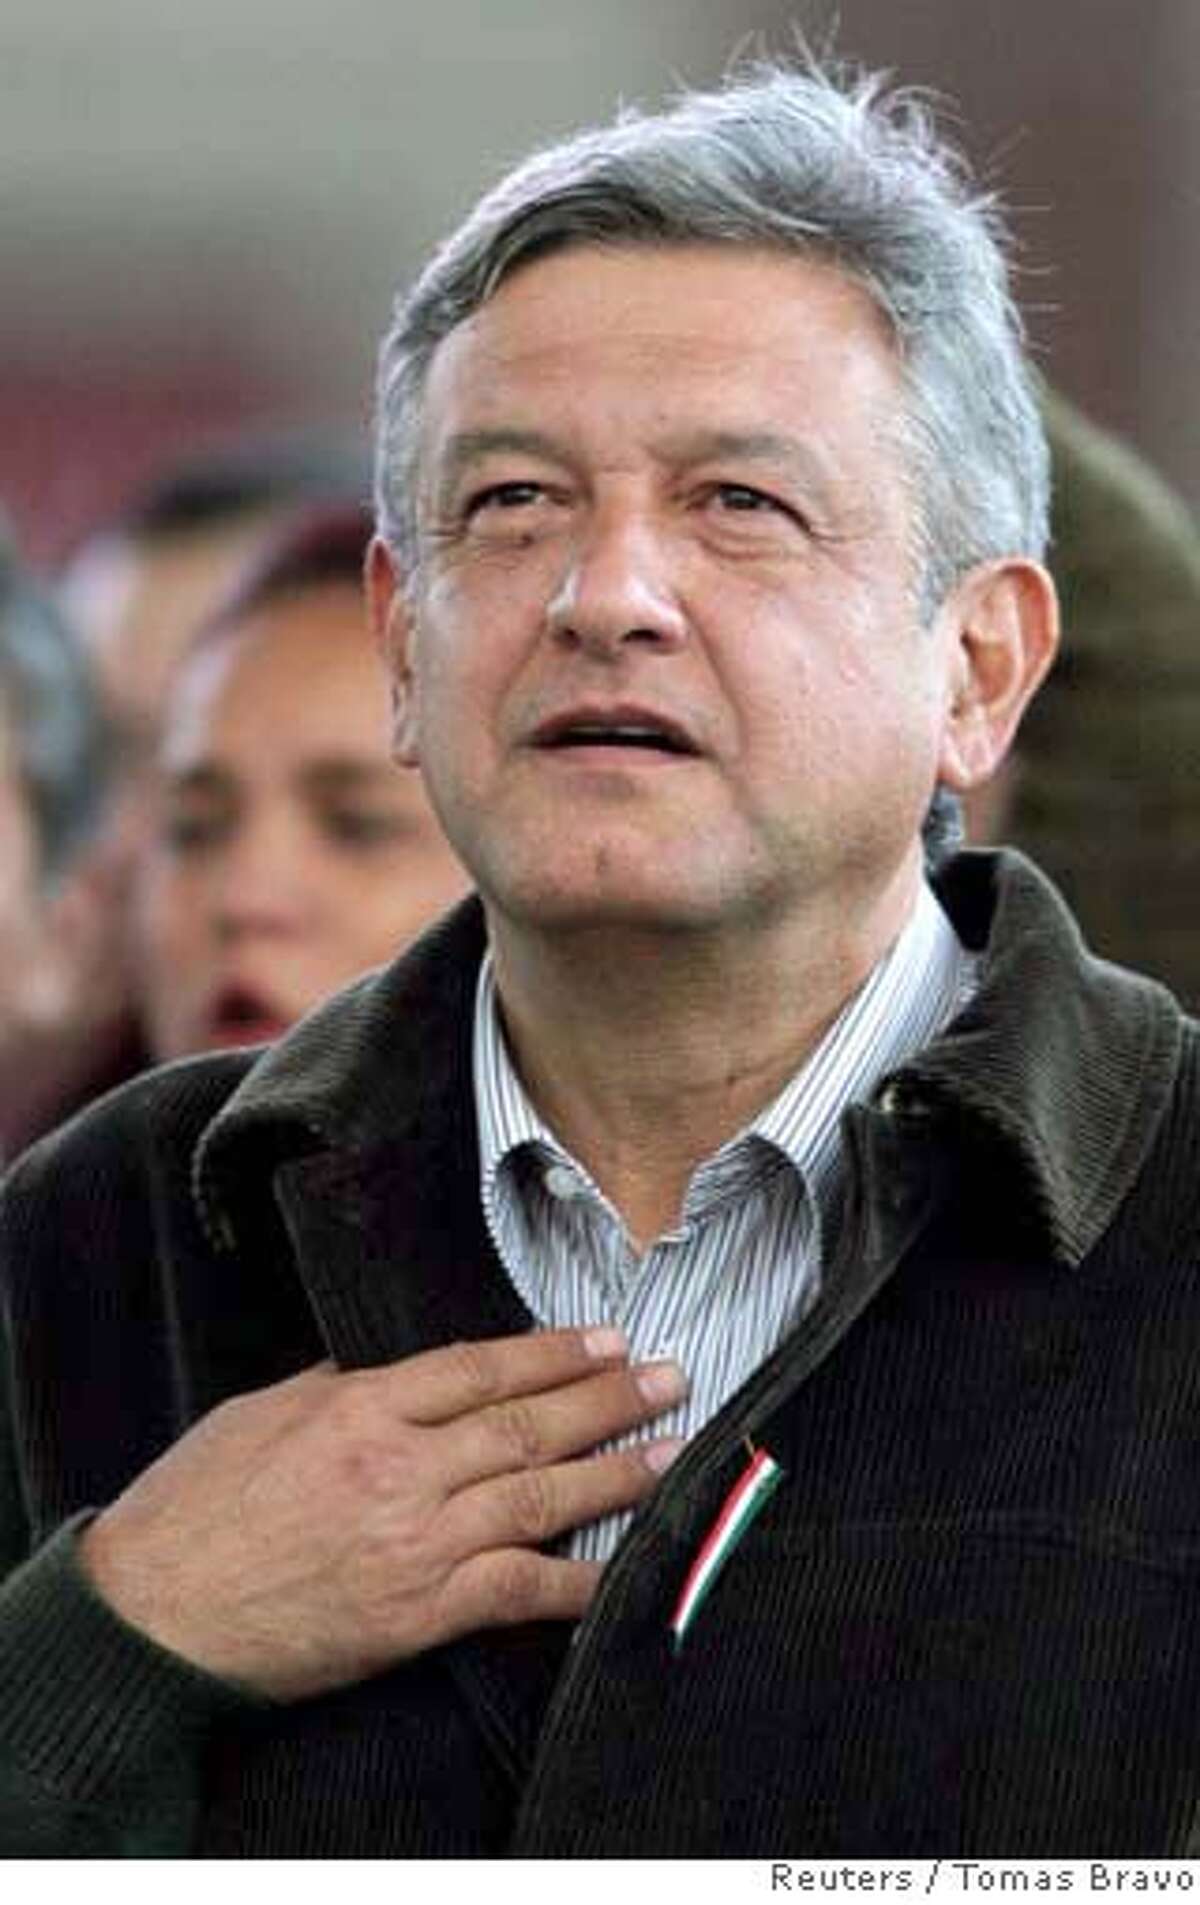 Mexico's Andres Manuel Lopez Obrador, presidential candidate for the Party of the Democratic Revolution (PRD), looks at supporters during a rally in downtown Mexico City, August 28, 2006. Mexico's top electoral court threw out leftists' allegations of massive fraud in last month's presidential election on Monday, handing almost certain victory to conservative candidate Felipe Calderon. REUTERS/Tomas Bravo (MEXICO) 0